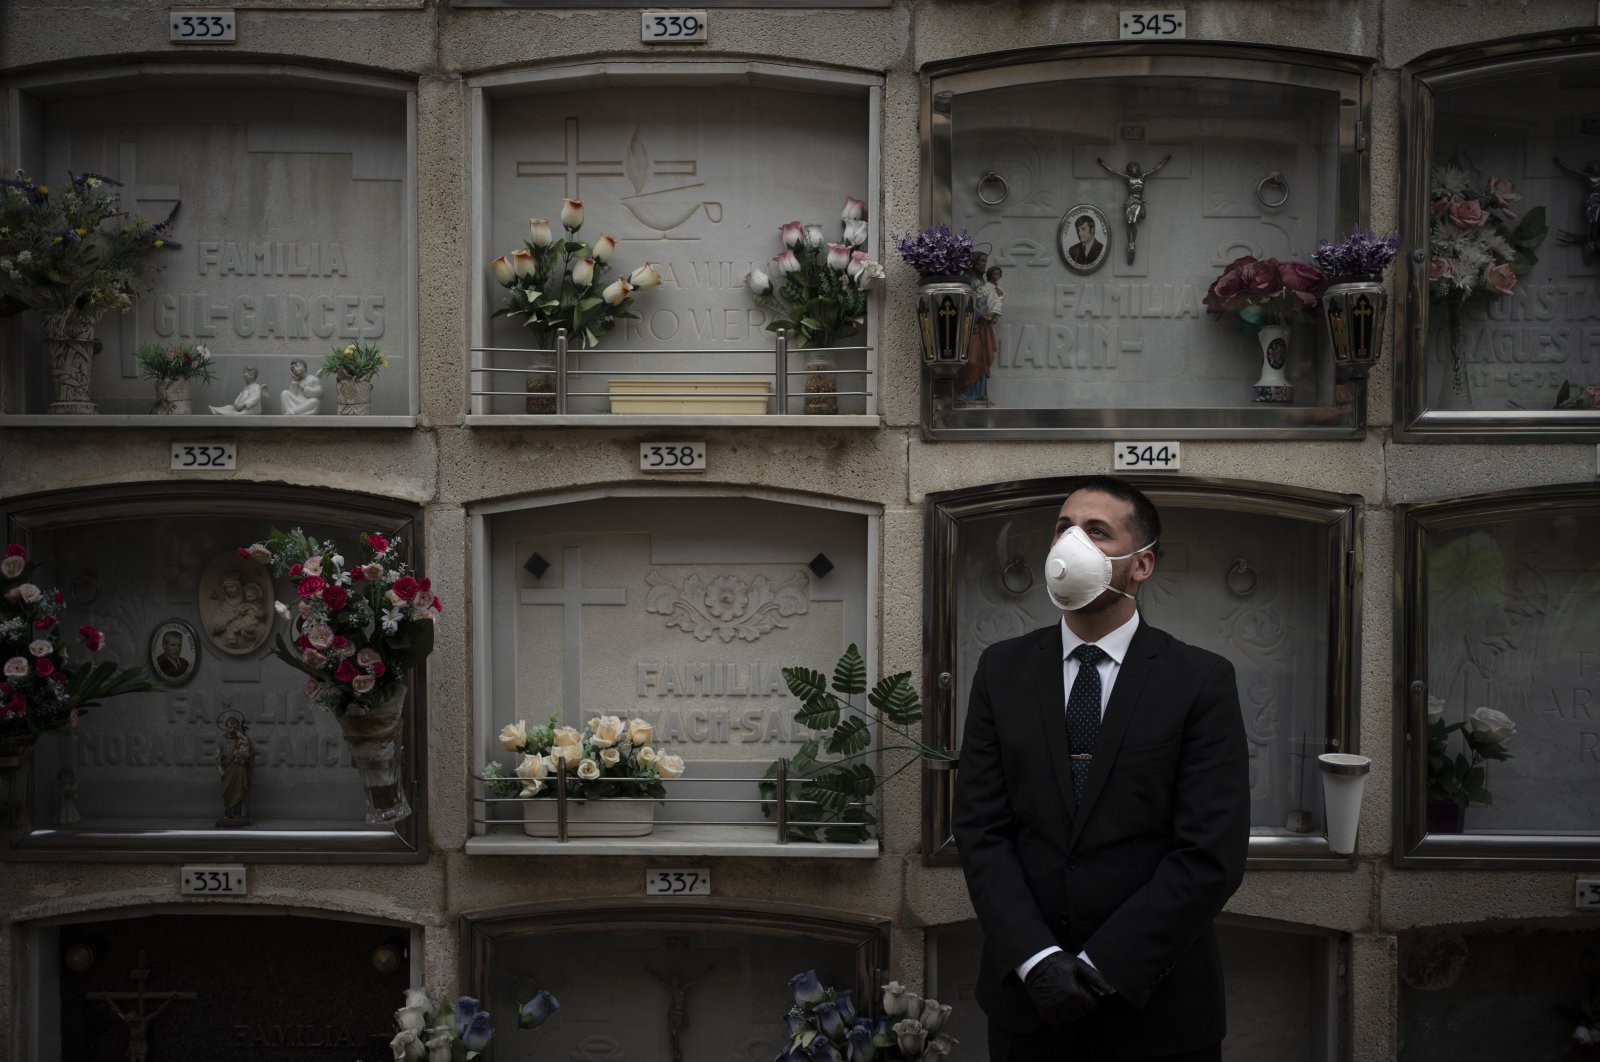 A funeral home worker wearing a face mask watches as the body of an unidentified person who died of unknown causes is placed into a niche at the Girona Cemetery in Girona, Spain, Friday, April 17, 2020. (AP Photo)